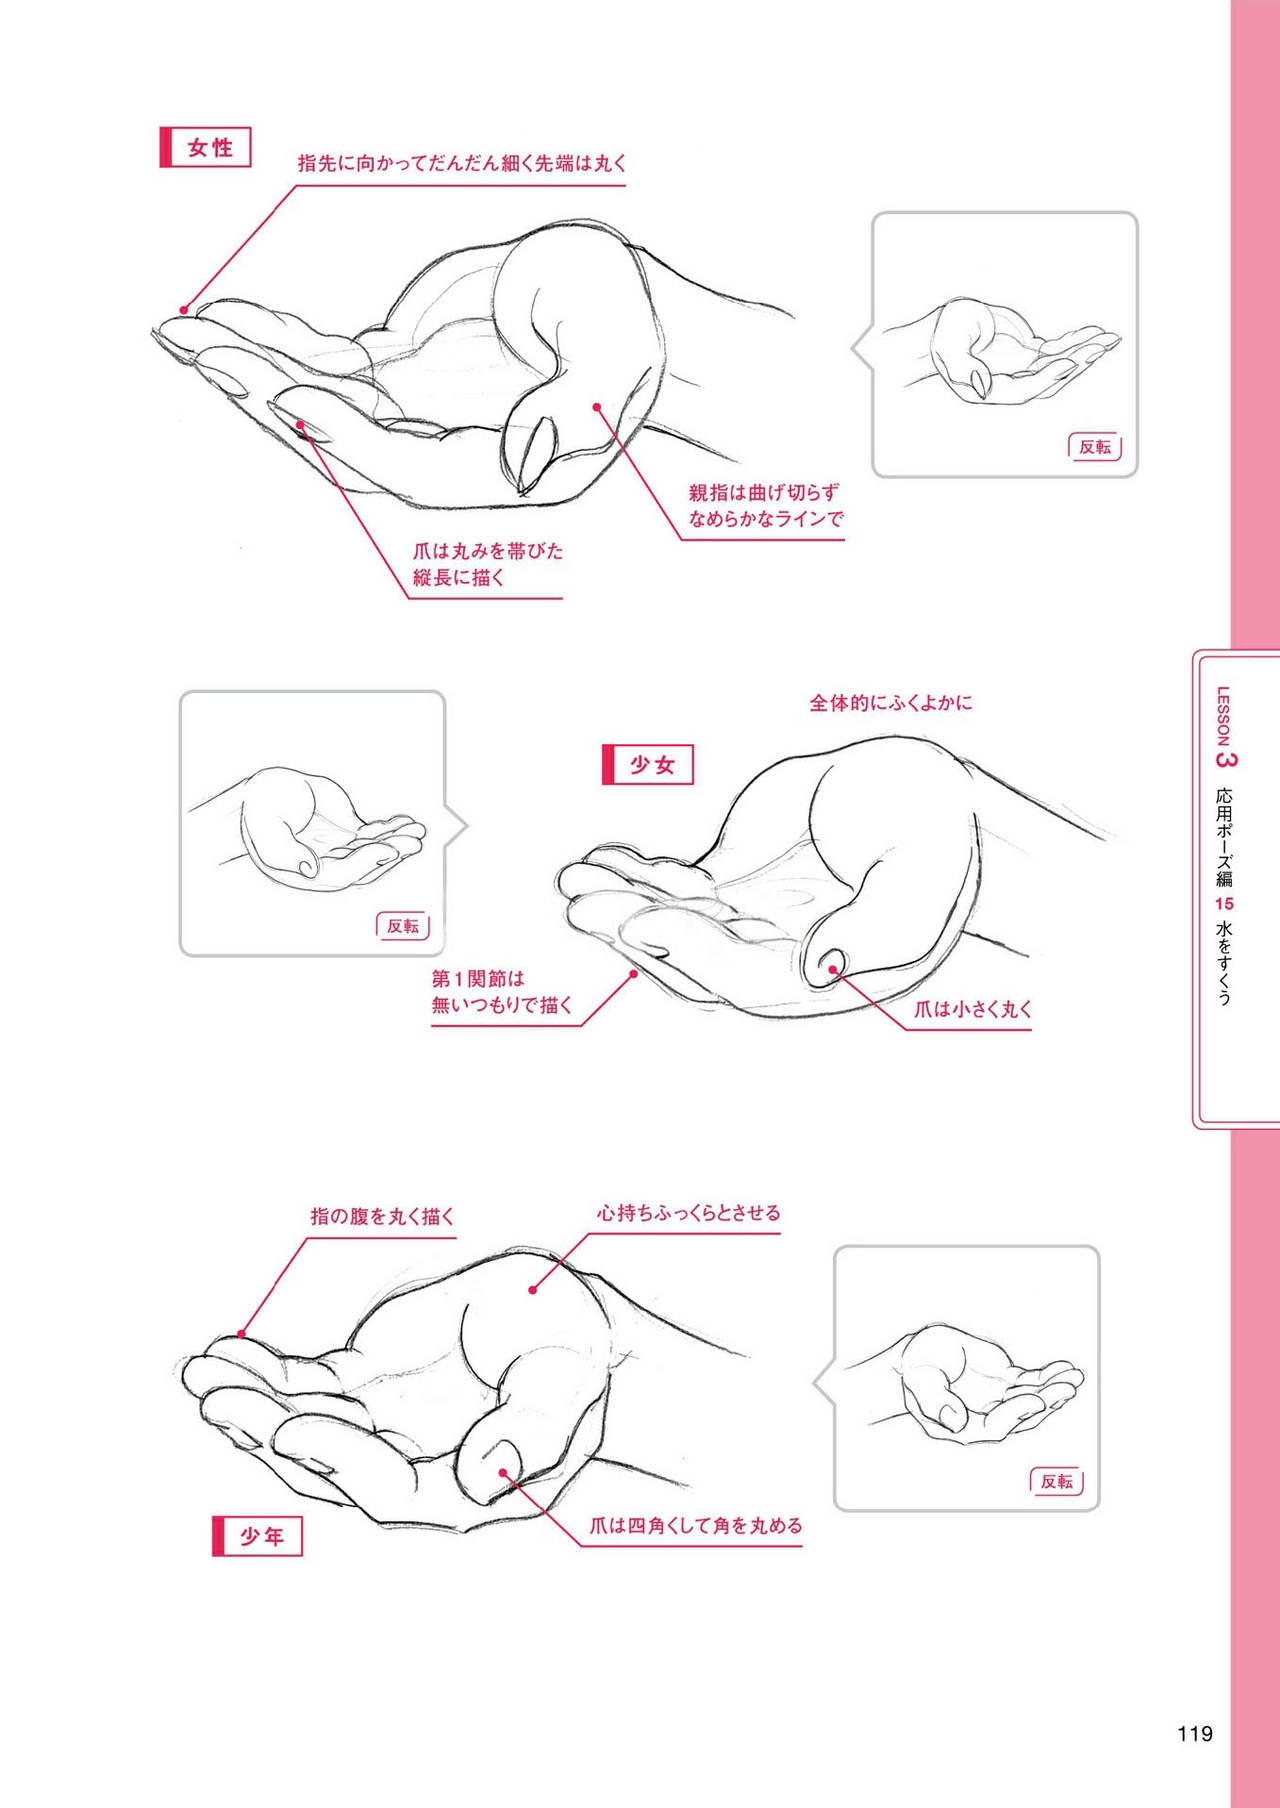 How to draw hands 119